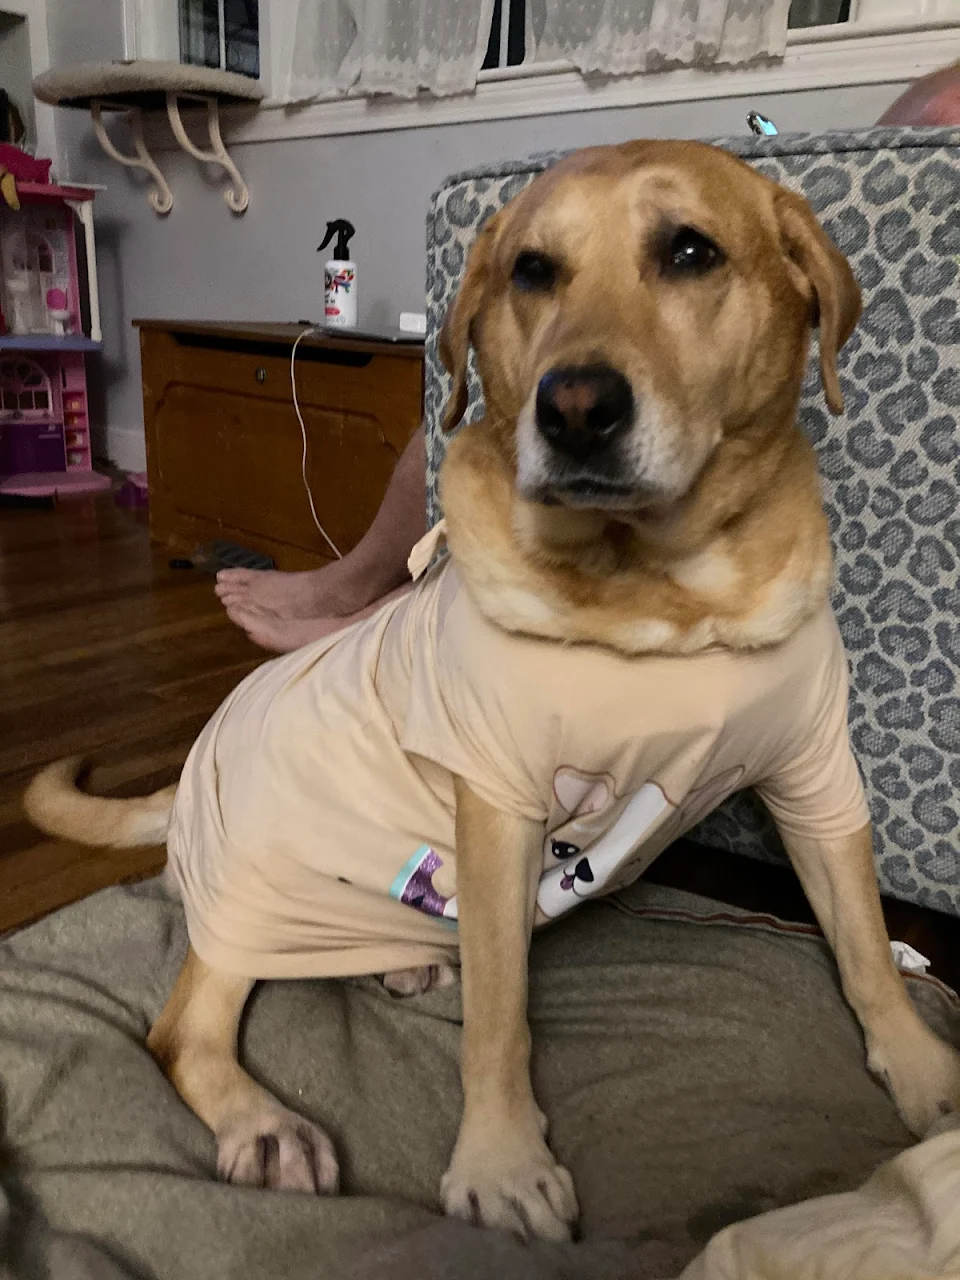 My dog had to go for surgery to remove a couple tumors and has to wear a shirt